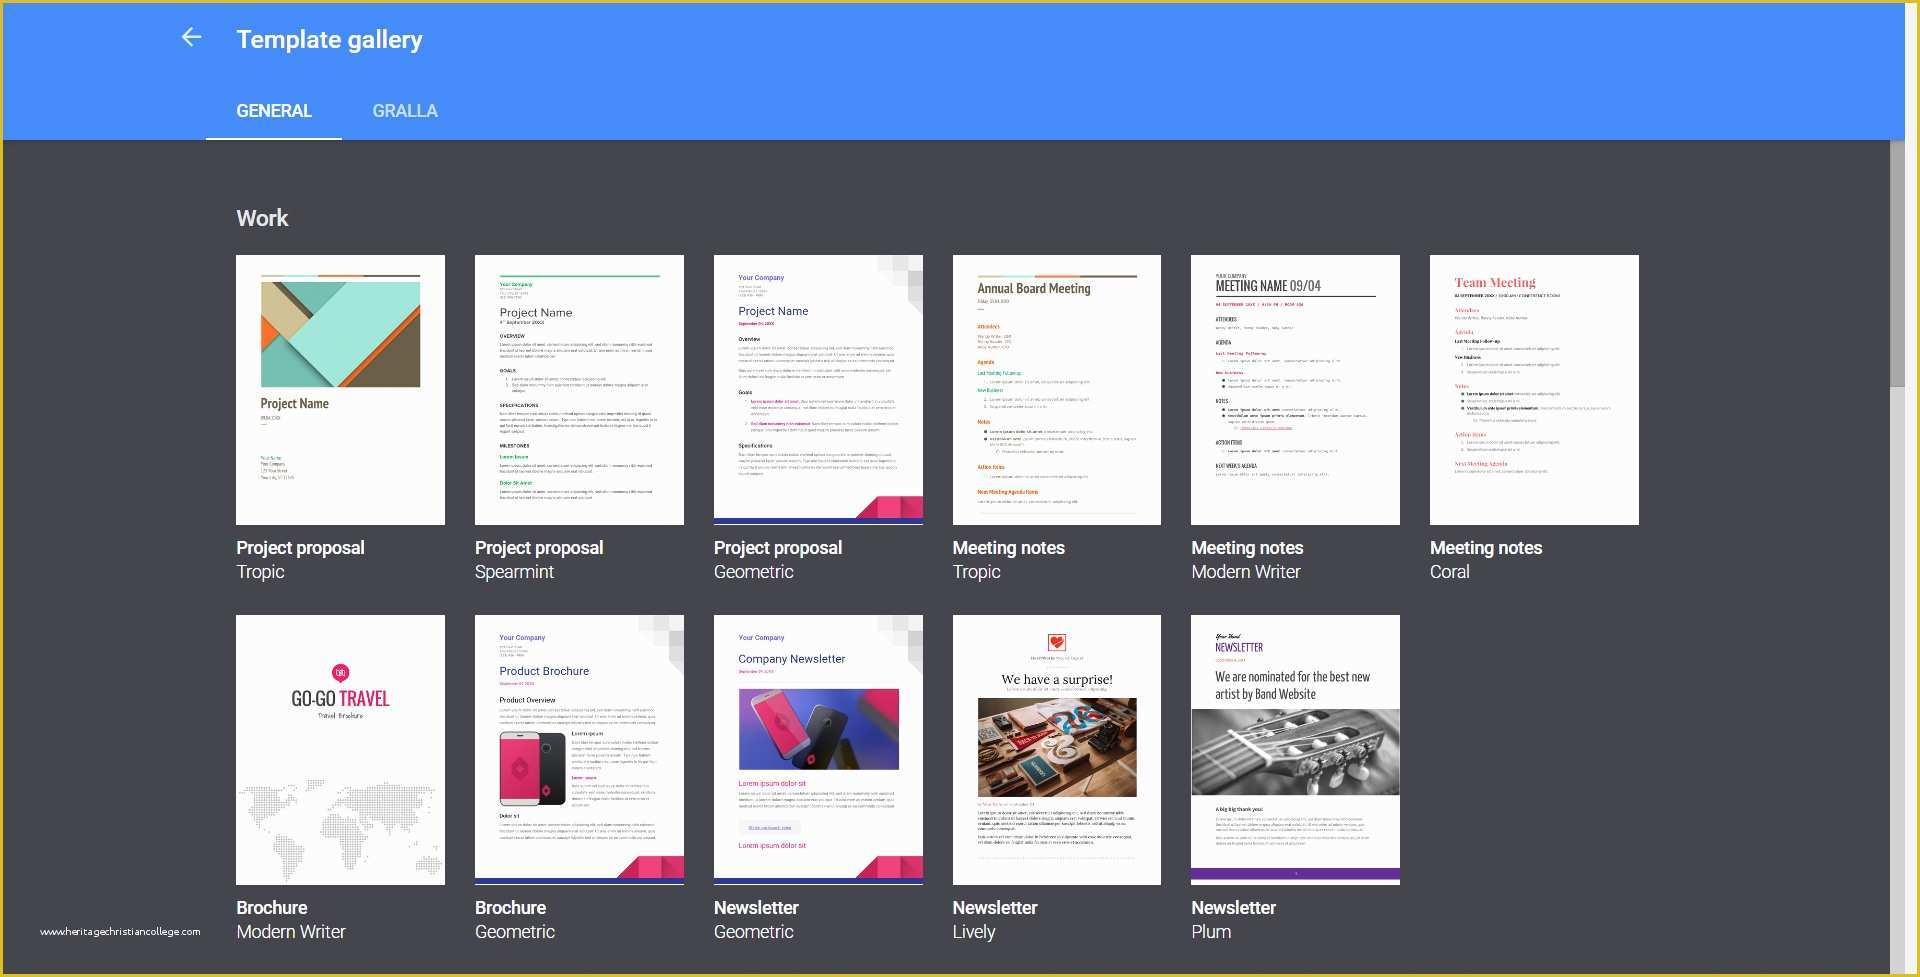 Google Docs Templates Free Of Microsoft Word or Google Docs Read Our Post On